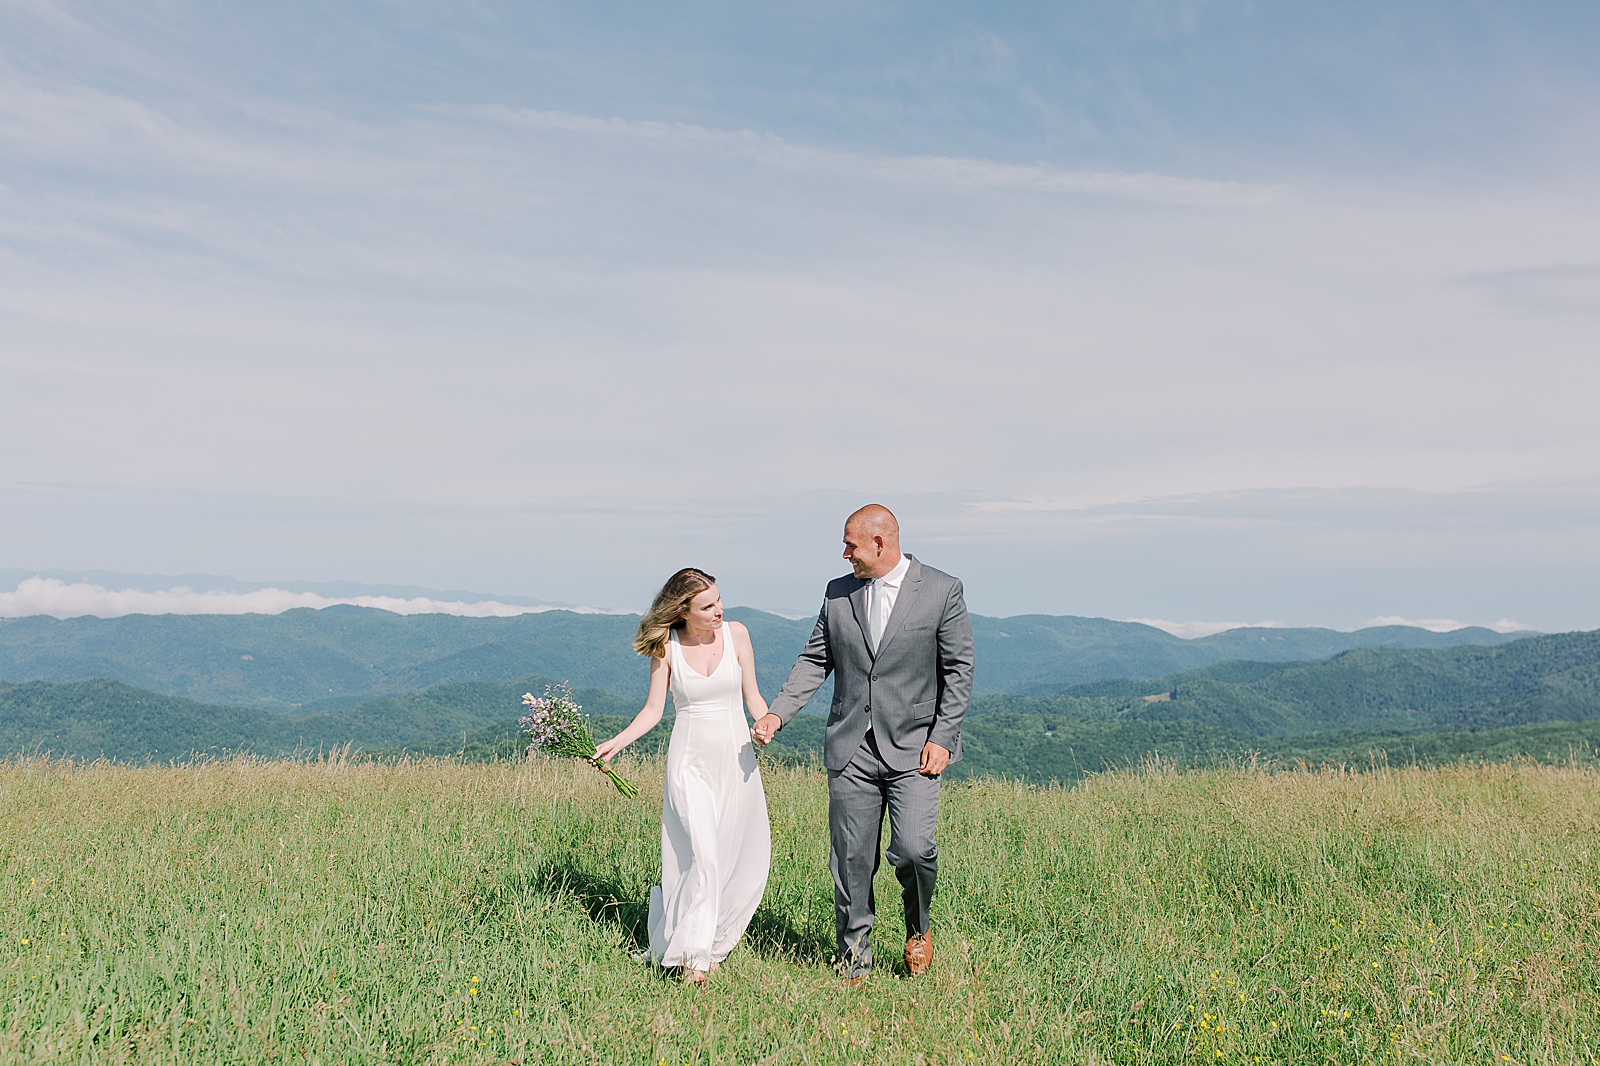 Max Patch Elopement Bride and Groom Walking Holding Hands Photo